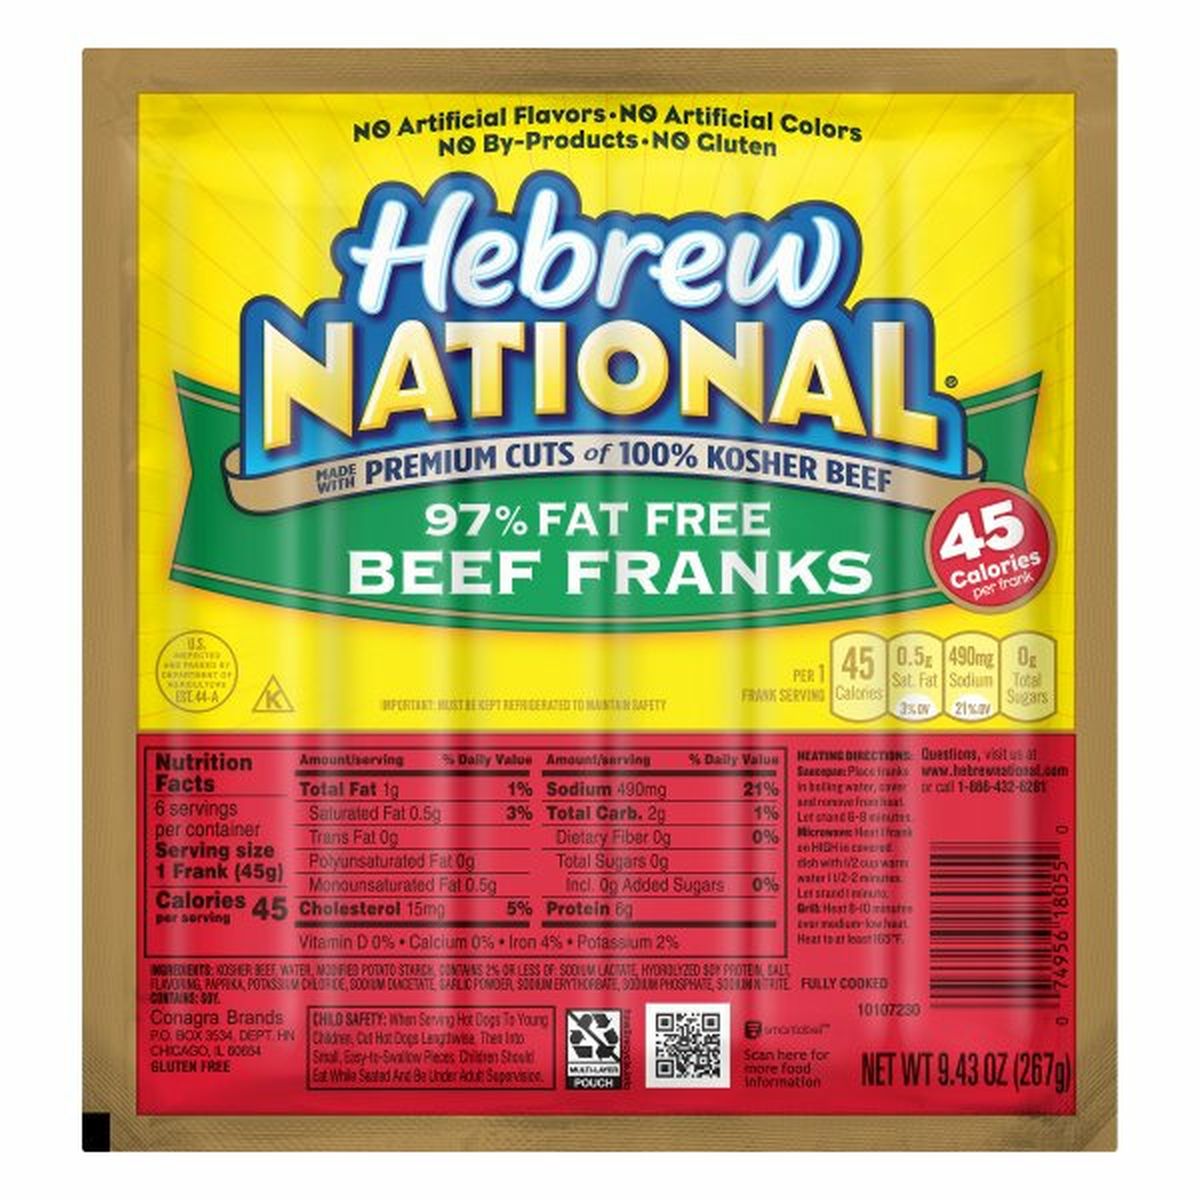 Calories in Hebrew National Beef Franks, 97% Fat Free